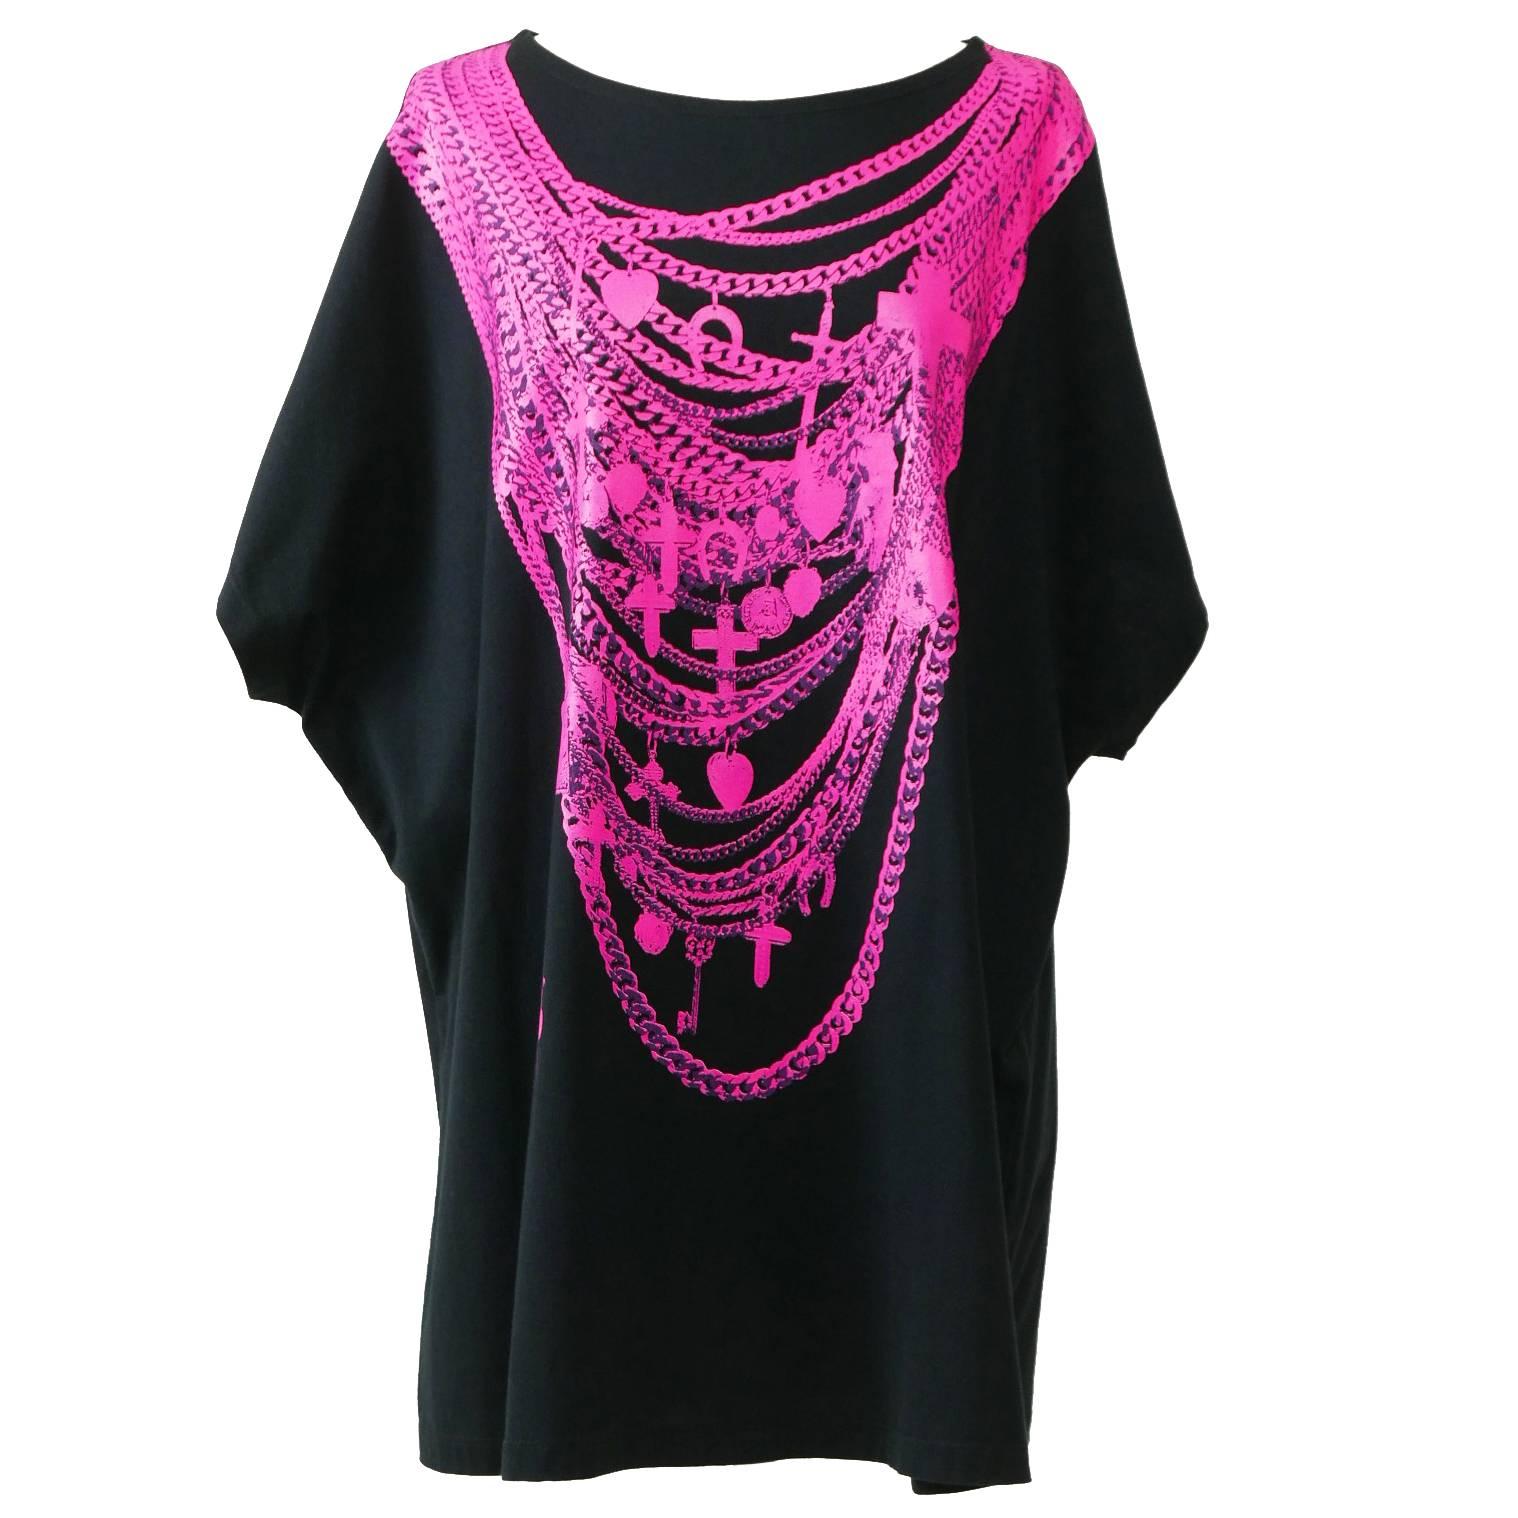 GIVENCHY by Riccardo Tisci Printed Oversize T-Shirt